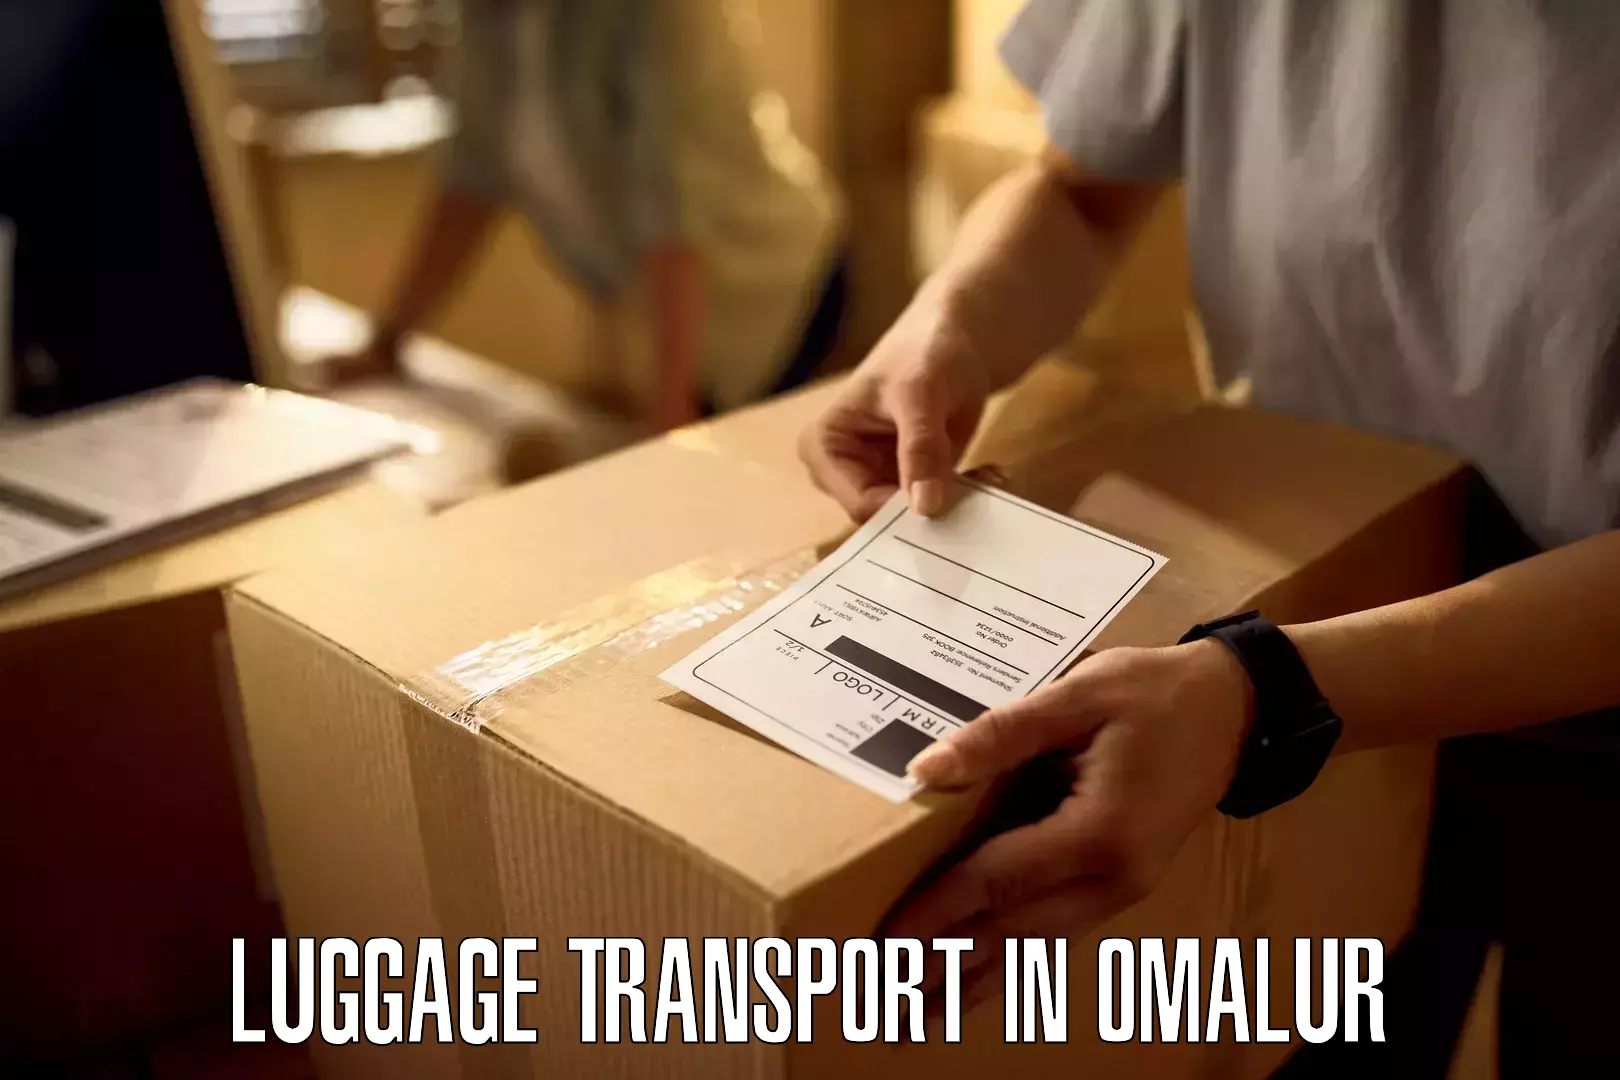 Luggage transport service in Omalur